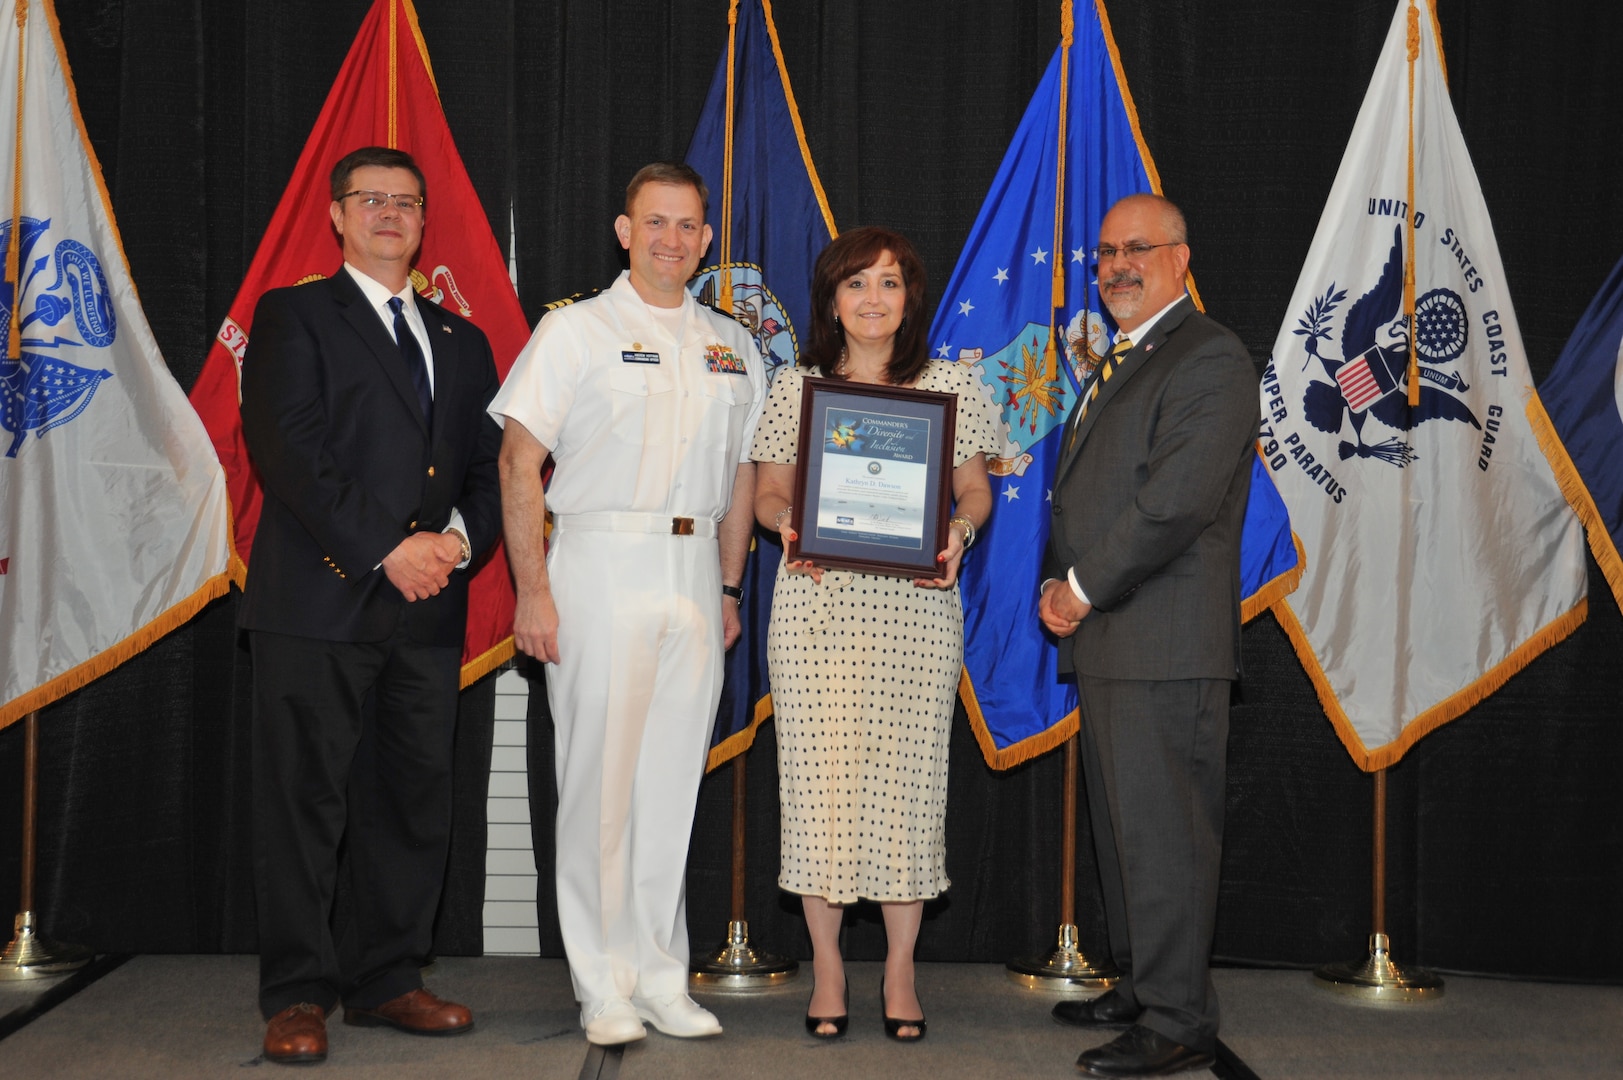 IMAGE: Kathryn Dawson is presented the Commander's Diversity and Inclusion Award at Naval Surface Warfare Center Dahlgren Division's annual awards ceremony, Apr. 26 at the Fredericksburg Expo and Conference Center.